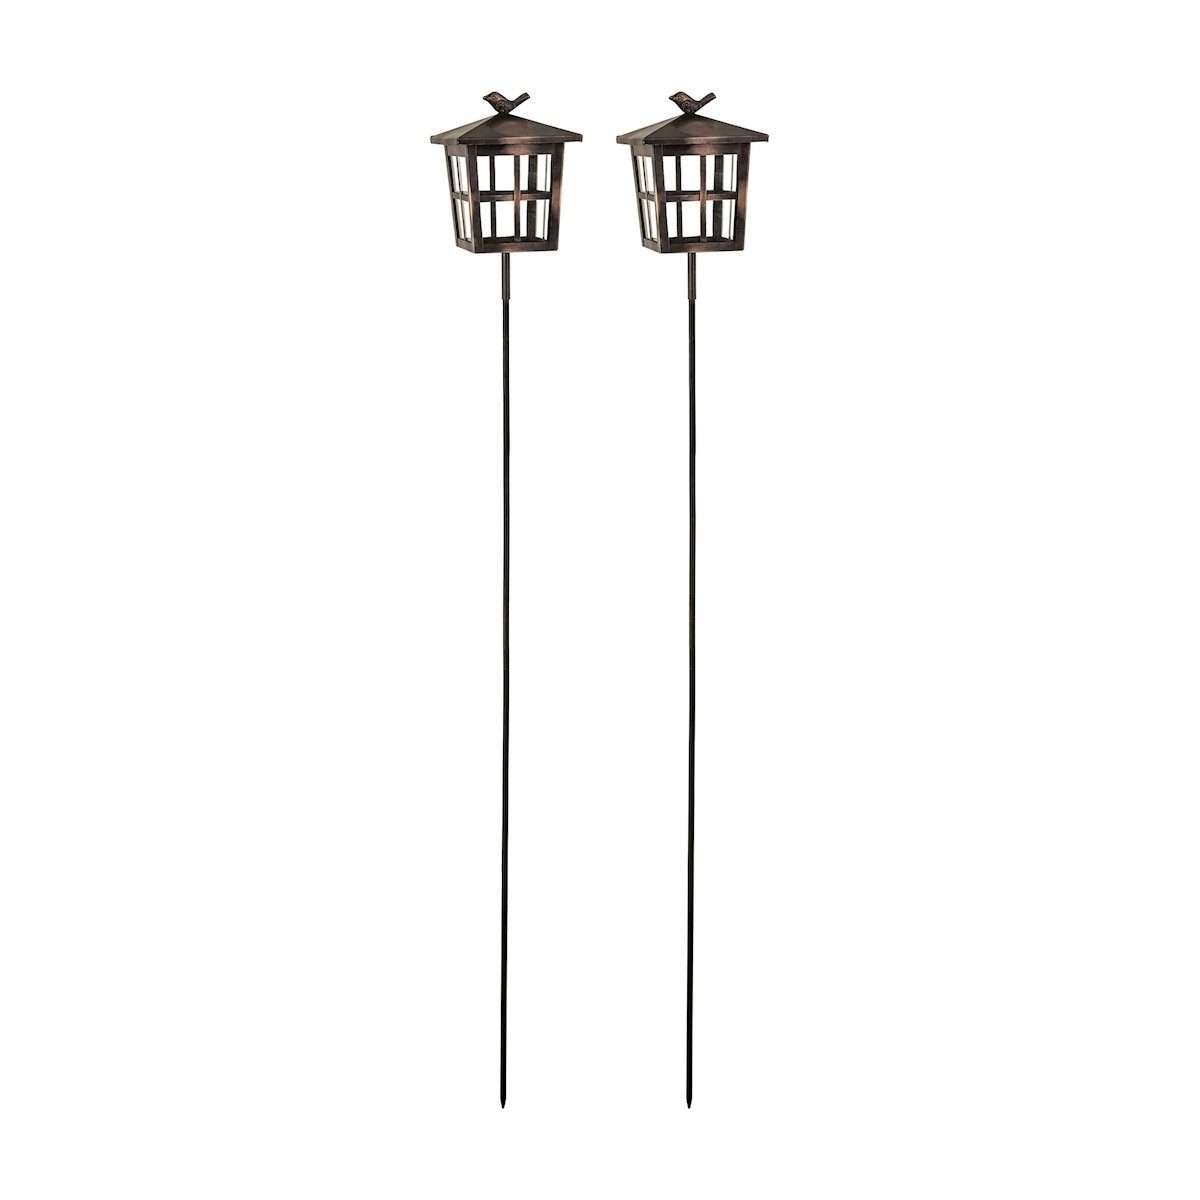 Woodlands Set of 2 Garden Stakes Accessories Pomeroy 